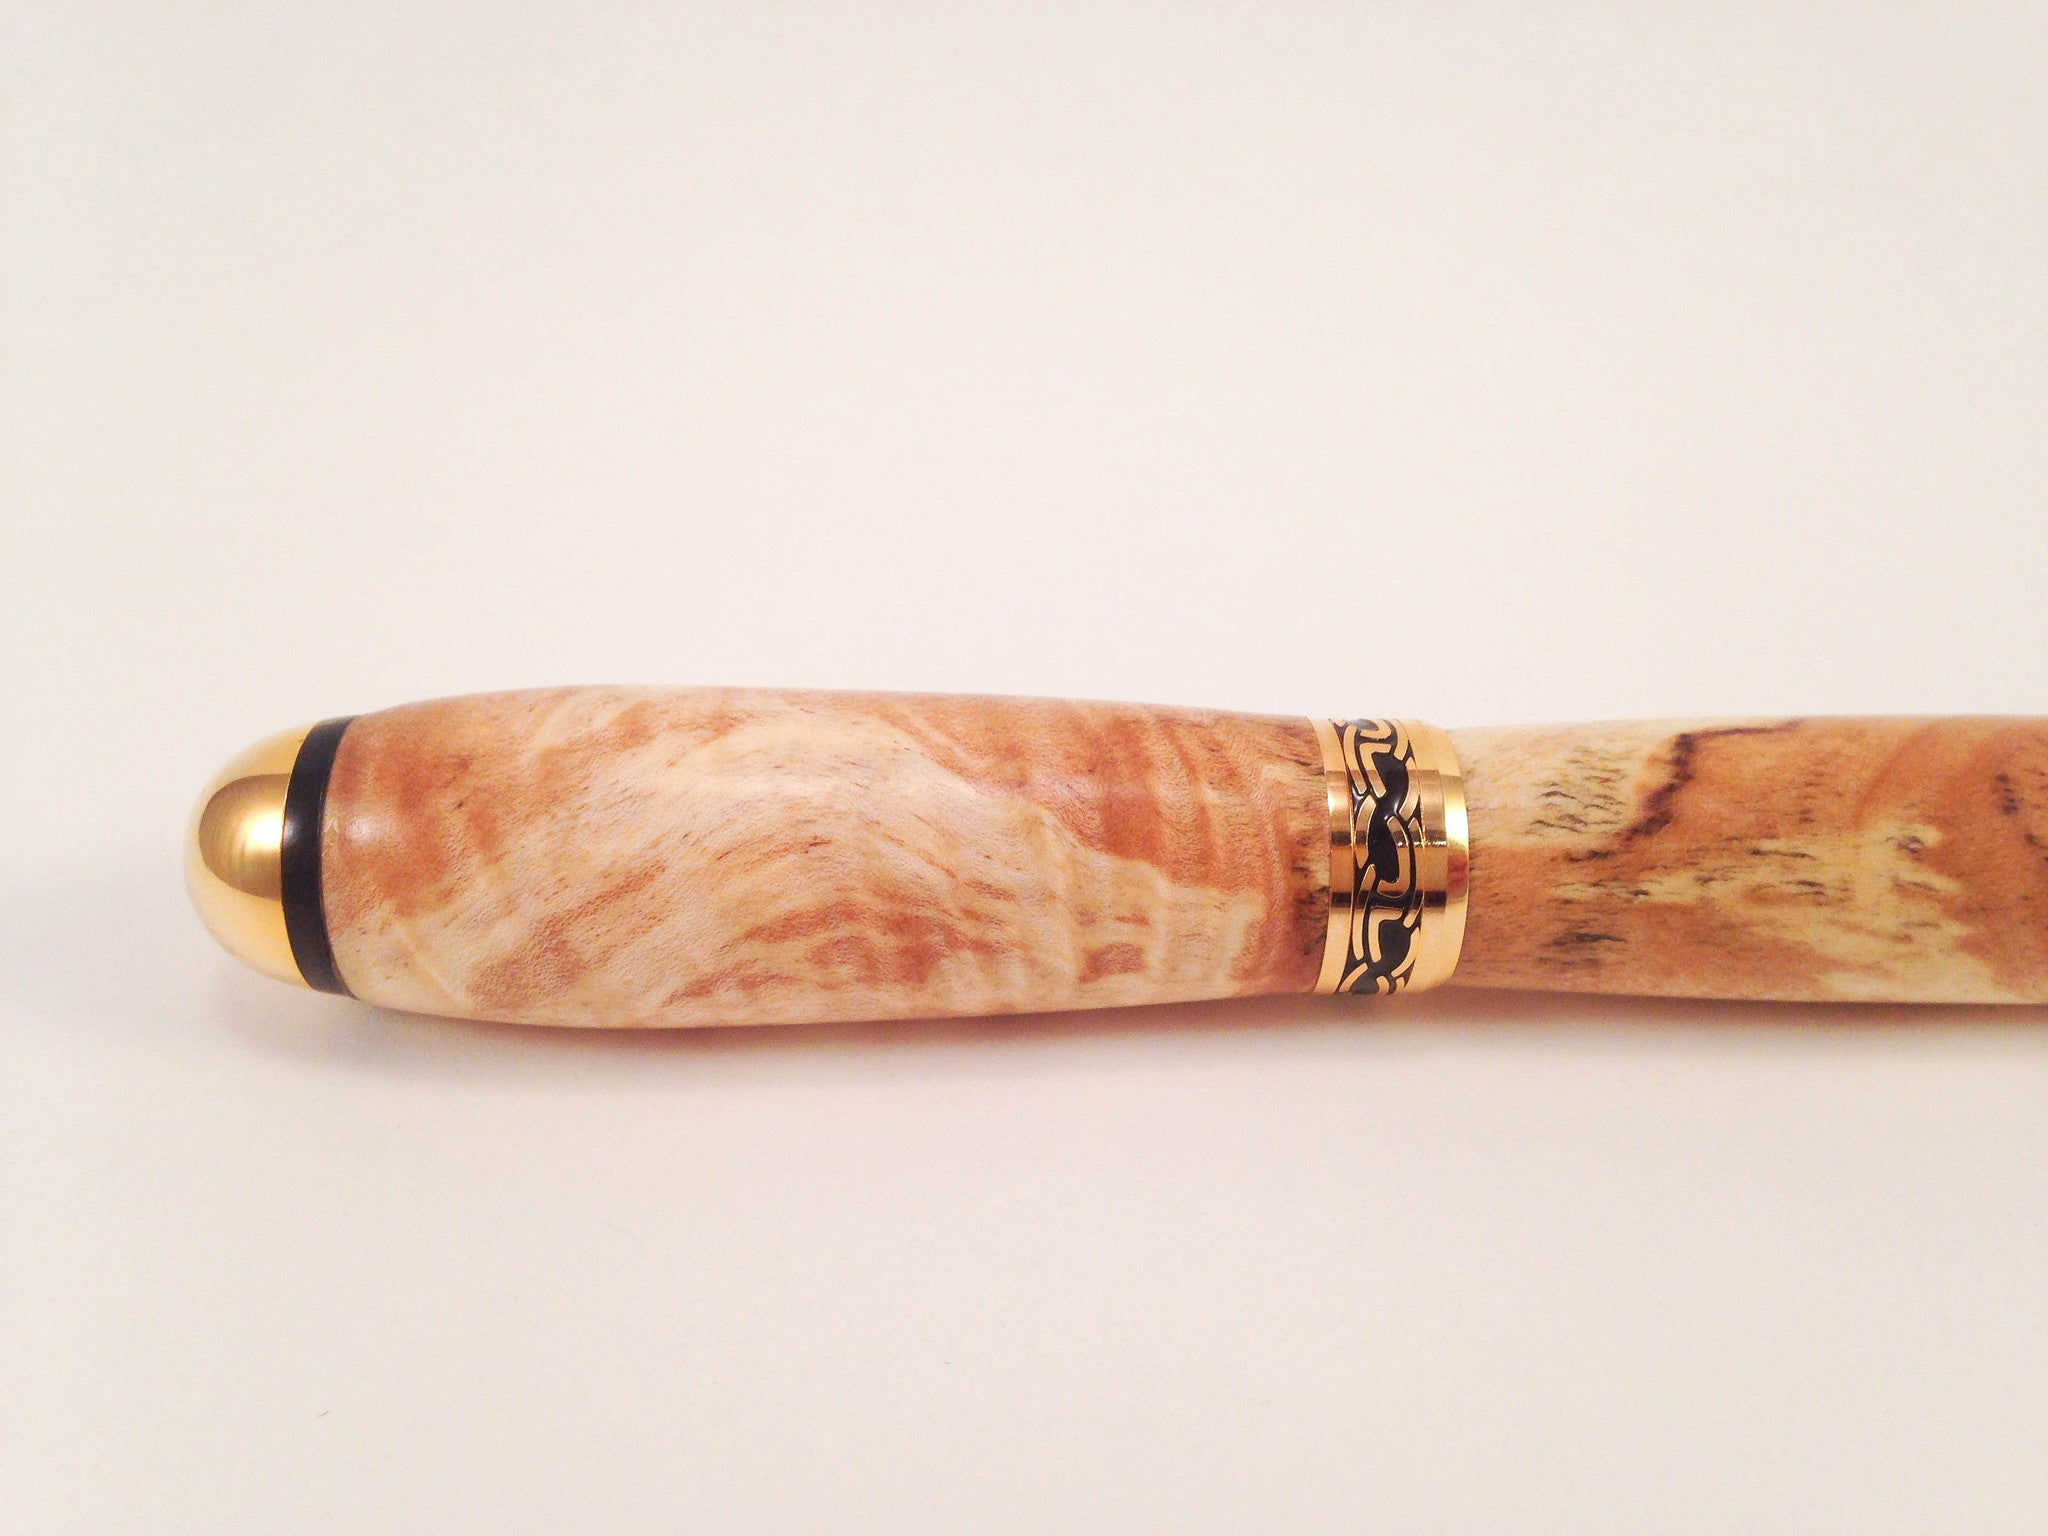 Pen (Snake Spalted Norway Maple) 0033 - No One Alike